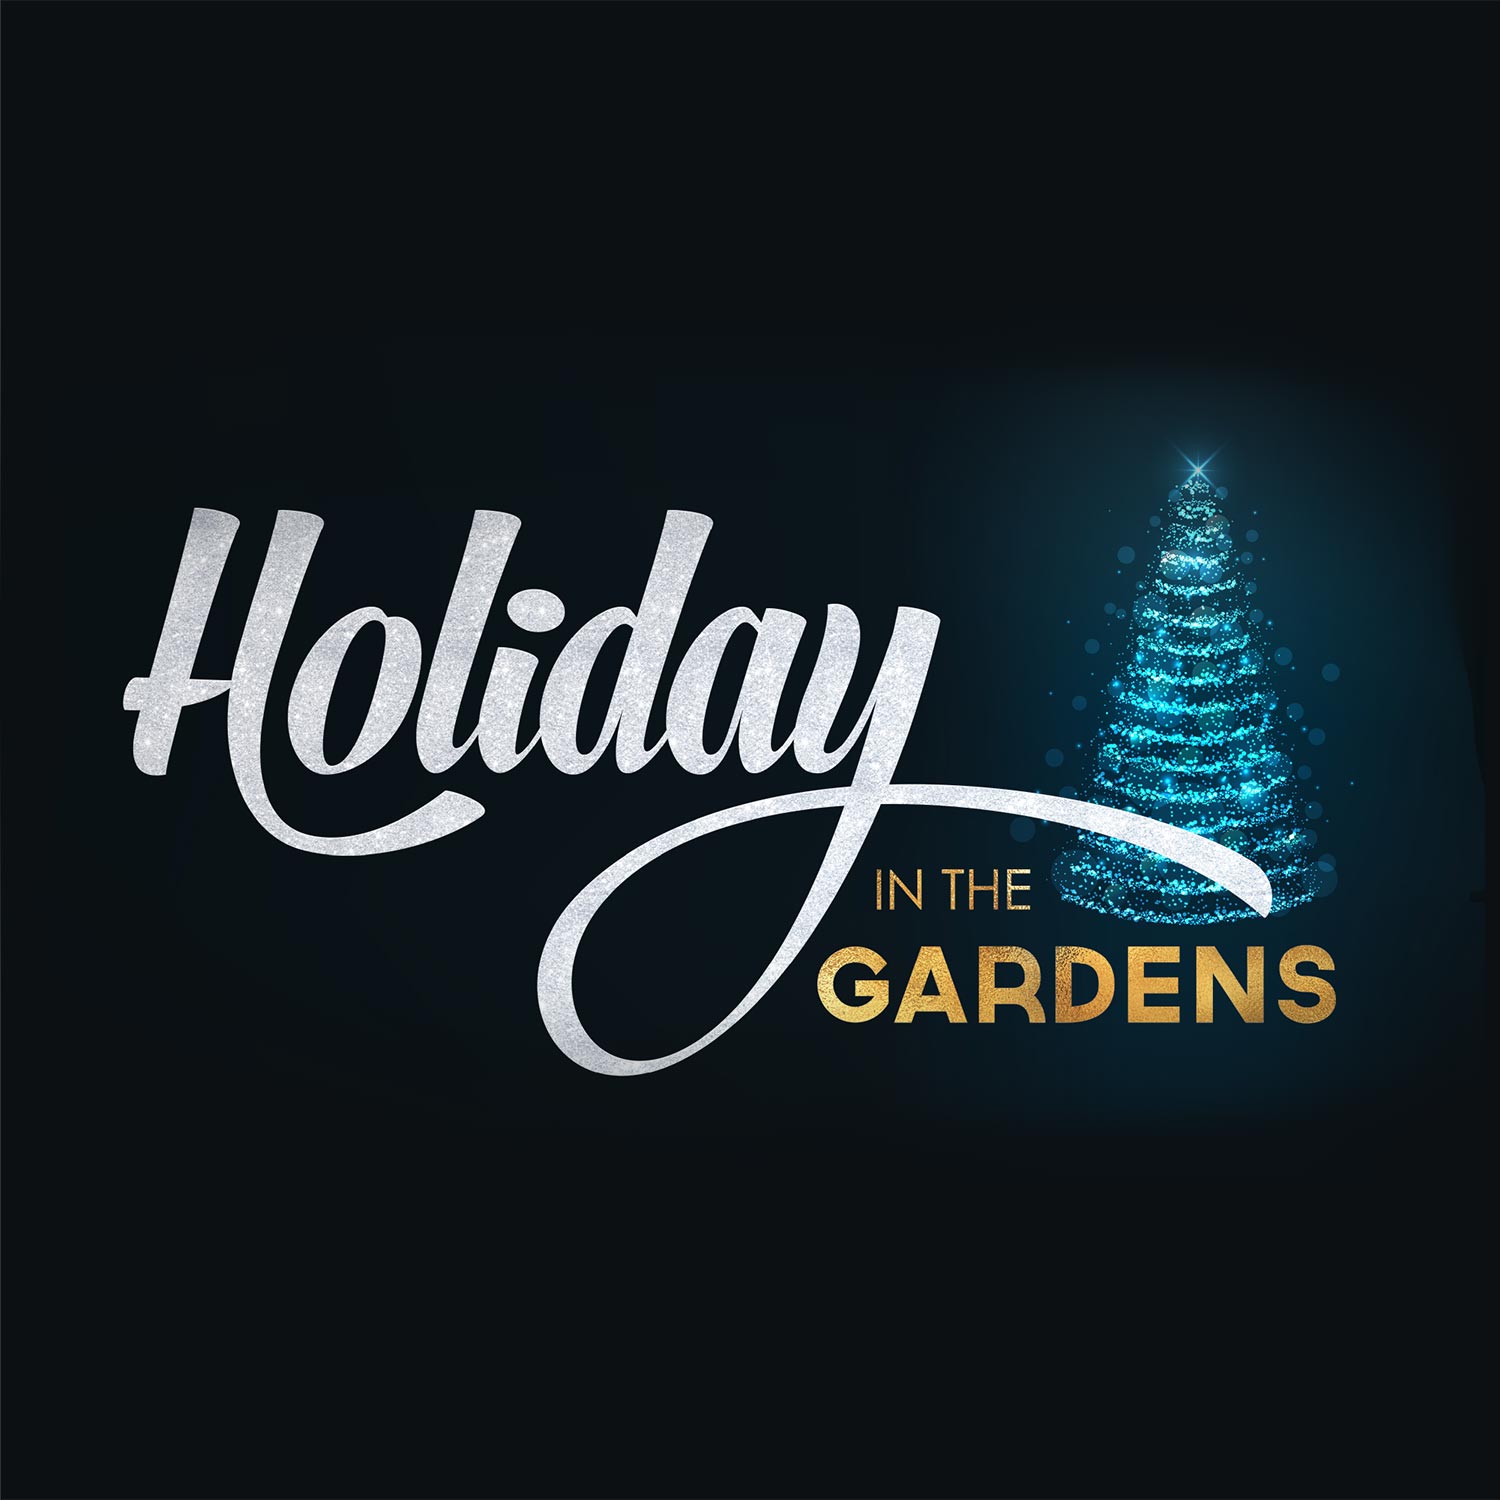 Logo Design for Moody Gardens, Holiday in the Gardens Events